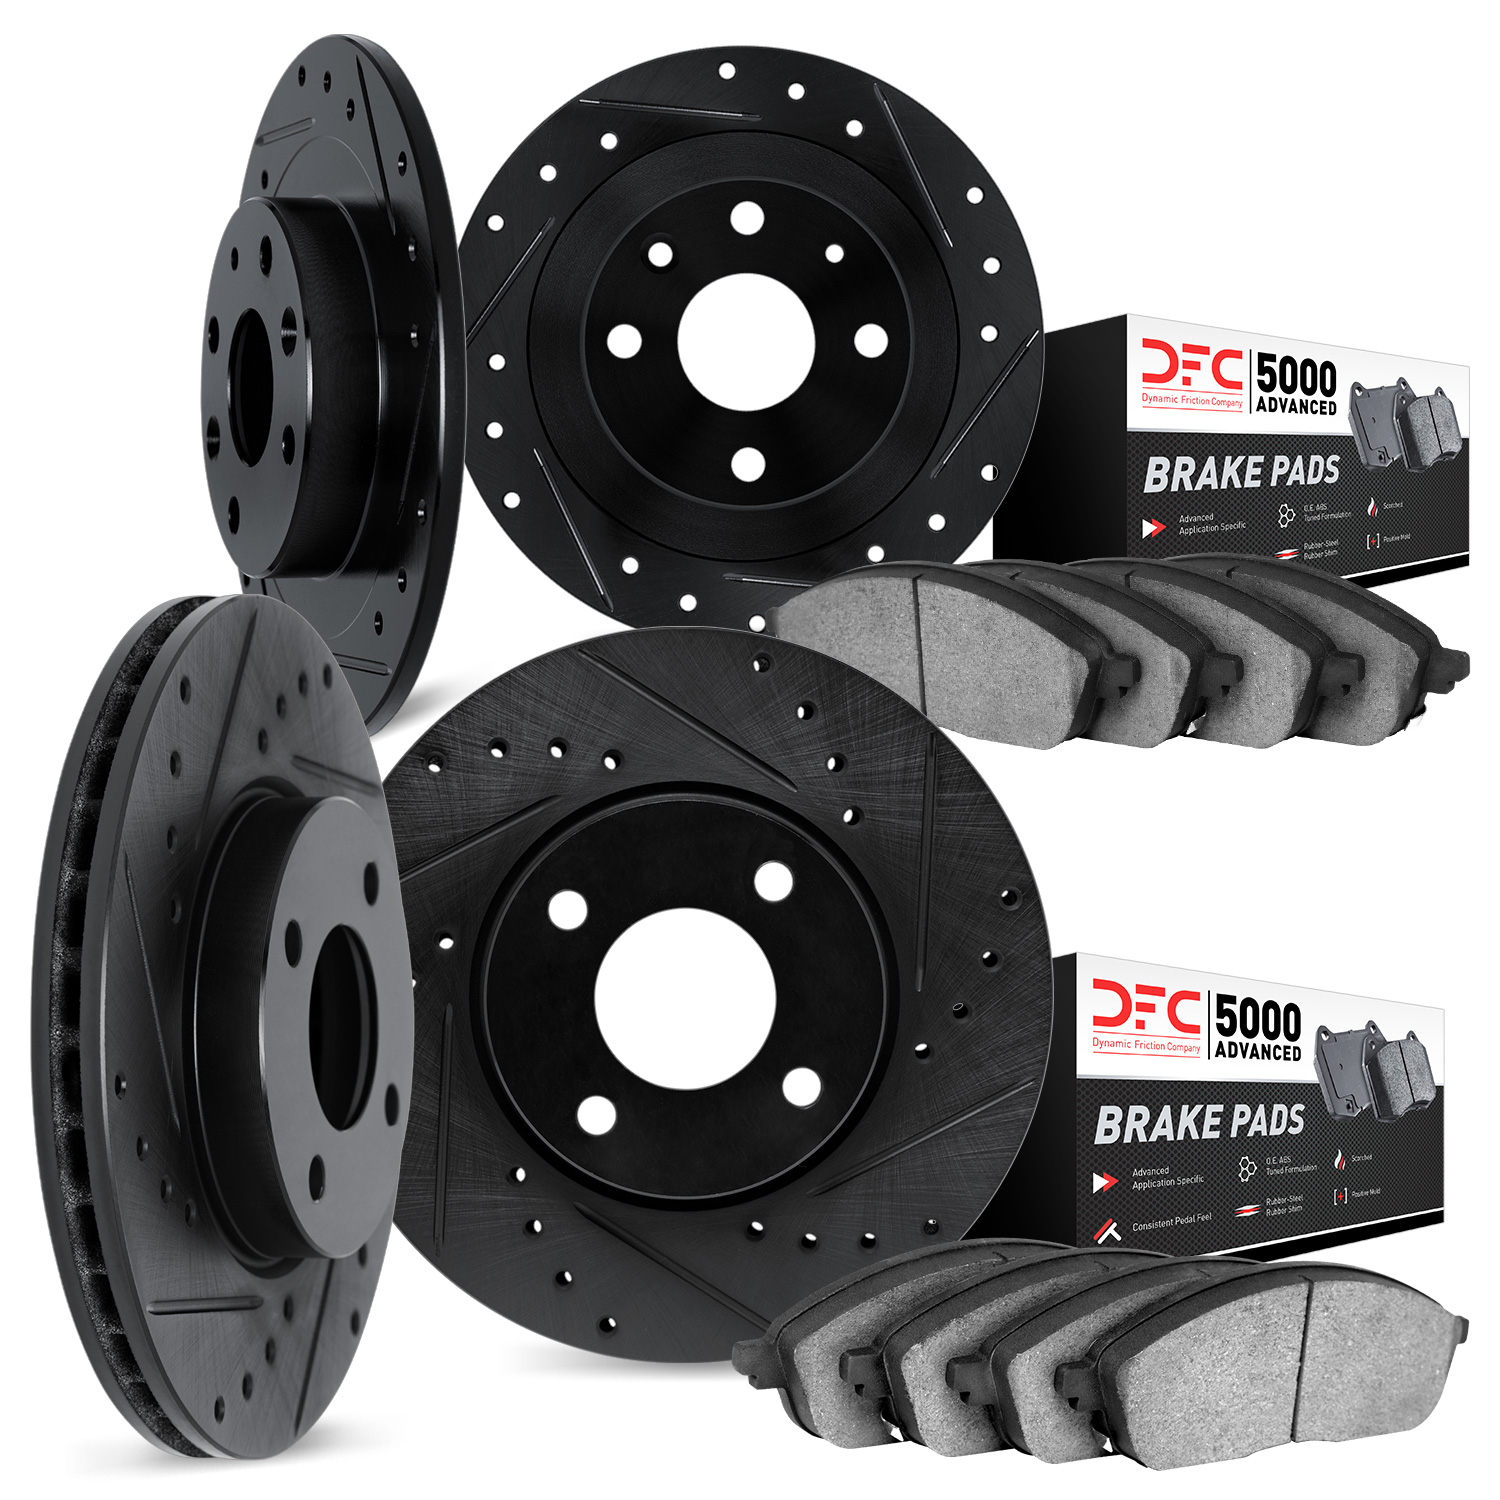 8504-67069 Drilled/Slotted Brake Rotors w/5000 Advanced Brake Pads Kit [Black], 1981-1981 Infiniti/Nissan, Position: Front and R